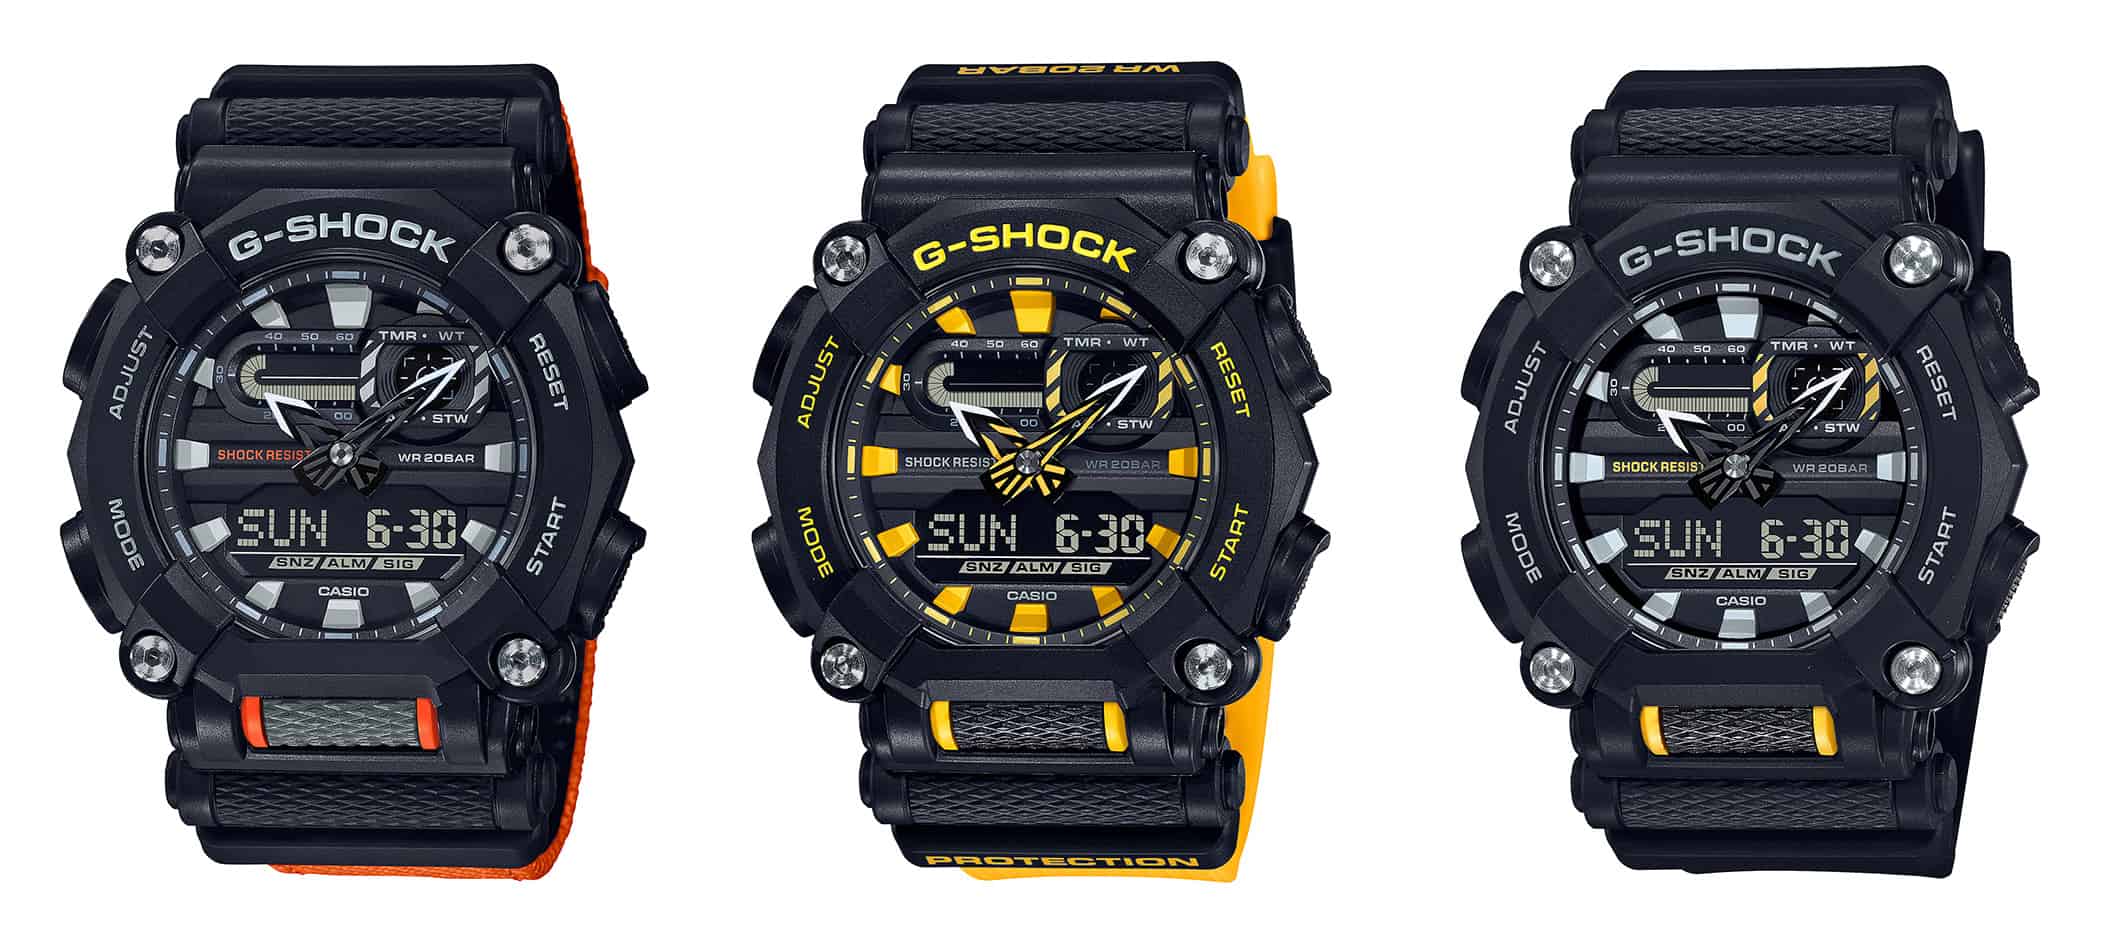 G-Shock Gets Industrial With New GA900 Family - Worn & Wound